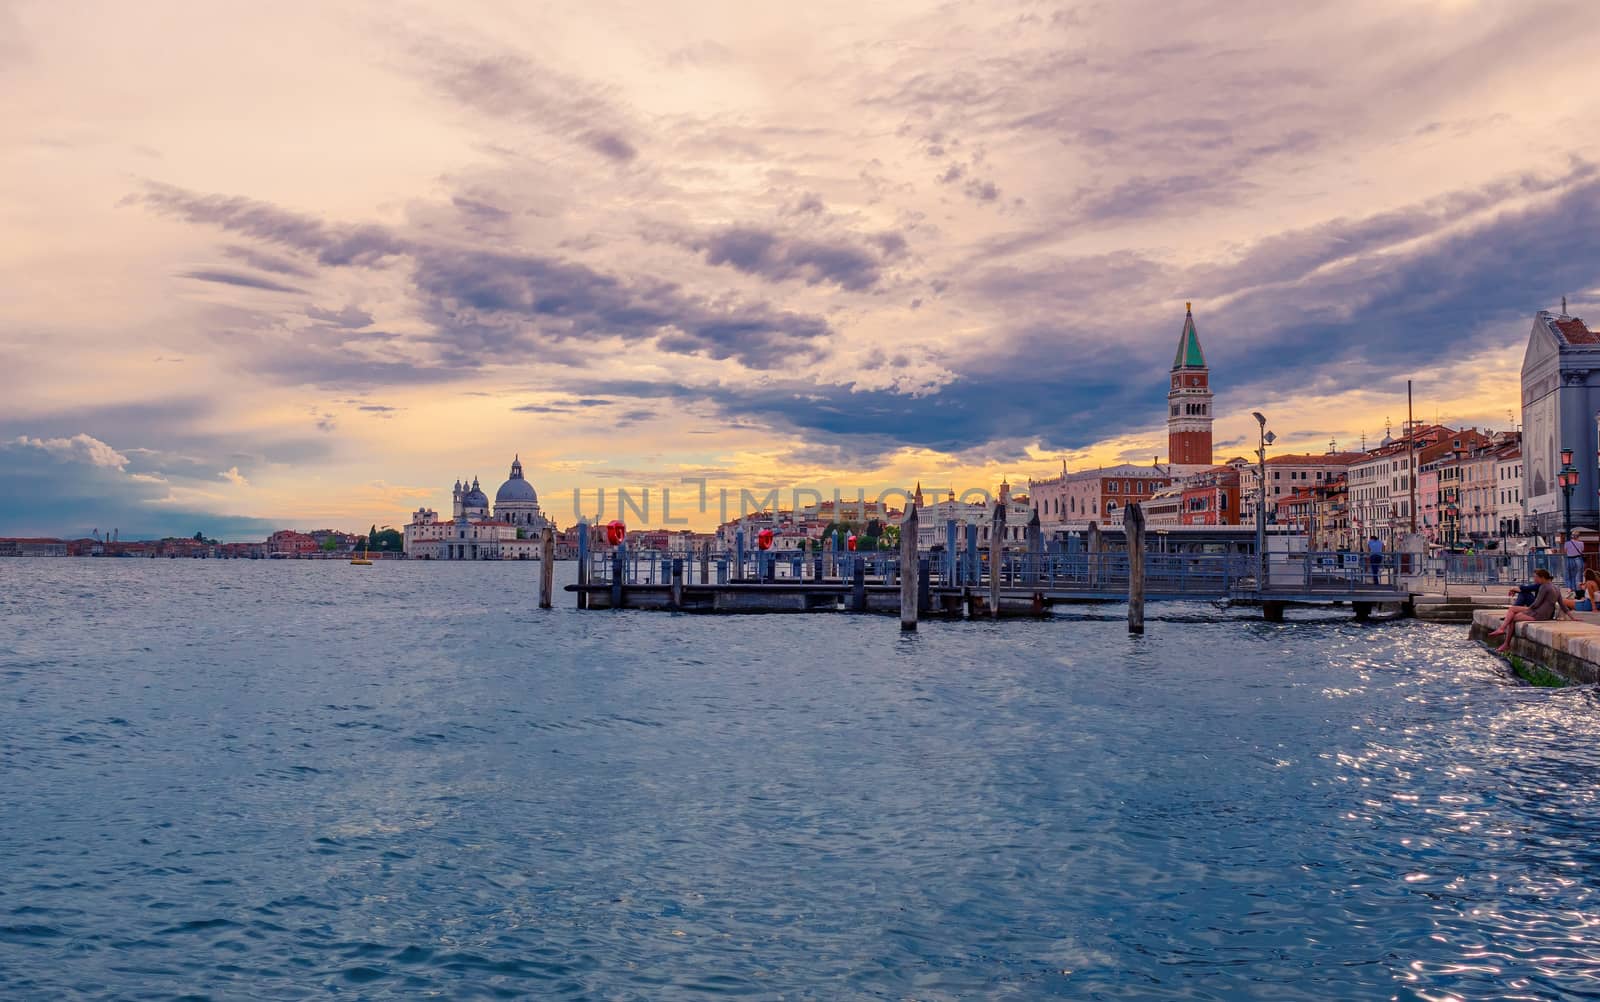 St. Mark's campanile and seafront in Venice